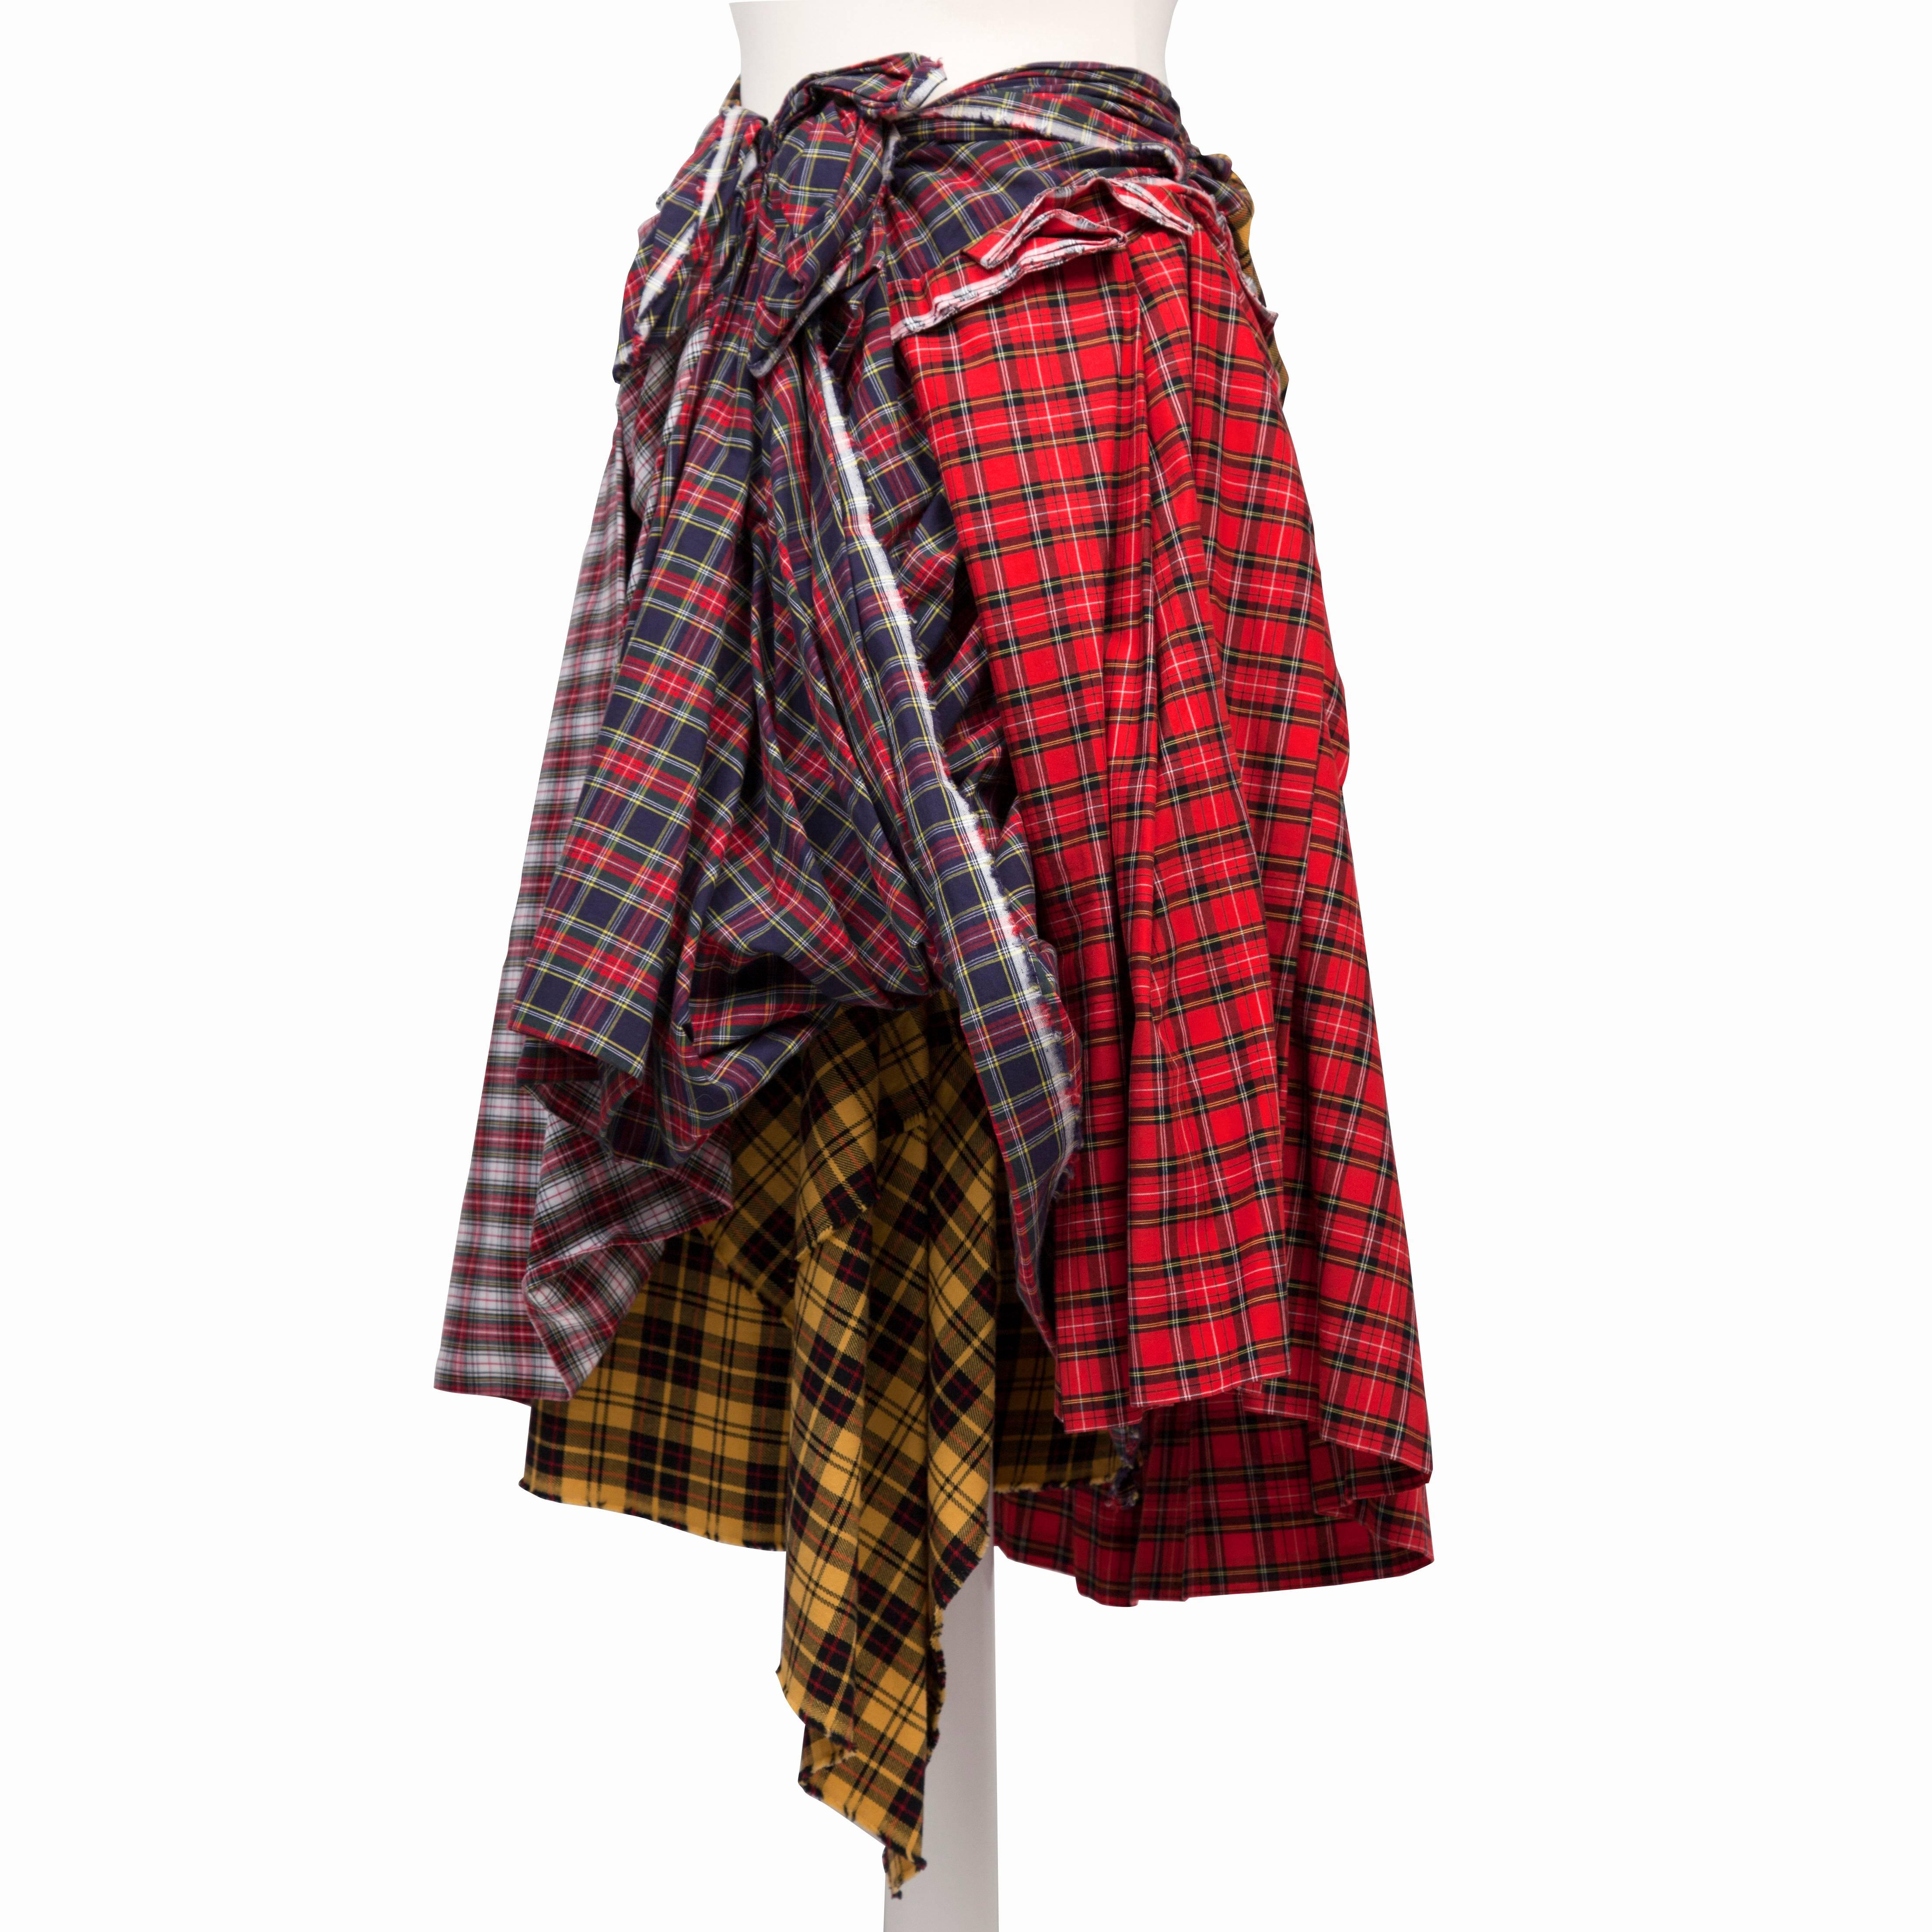 Incredible Comme des Garcons plaid skirt from AD 2005. 
Masterfully crafted piece with combination of tartan that made all sides have unique sculptural dimensions possible. Side zip opening. The exact piece was part of The Art of the In-Between :